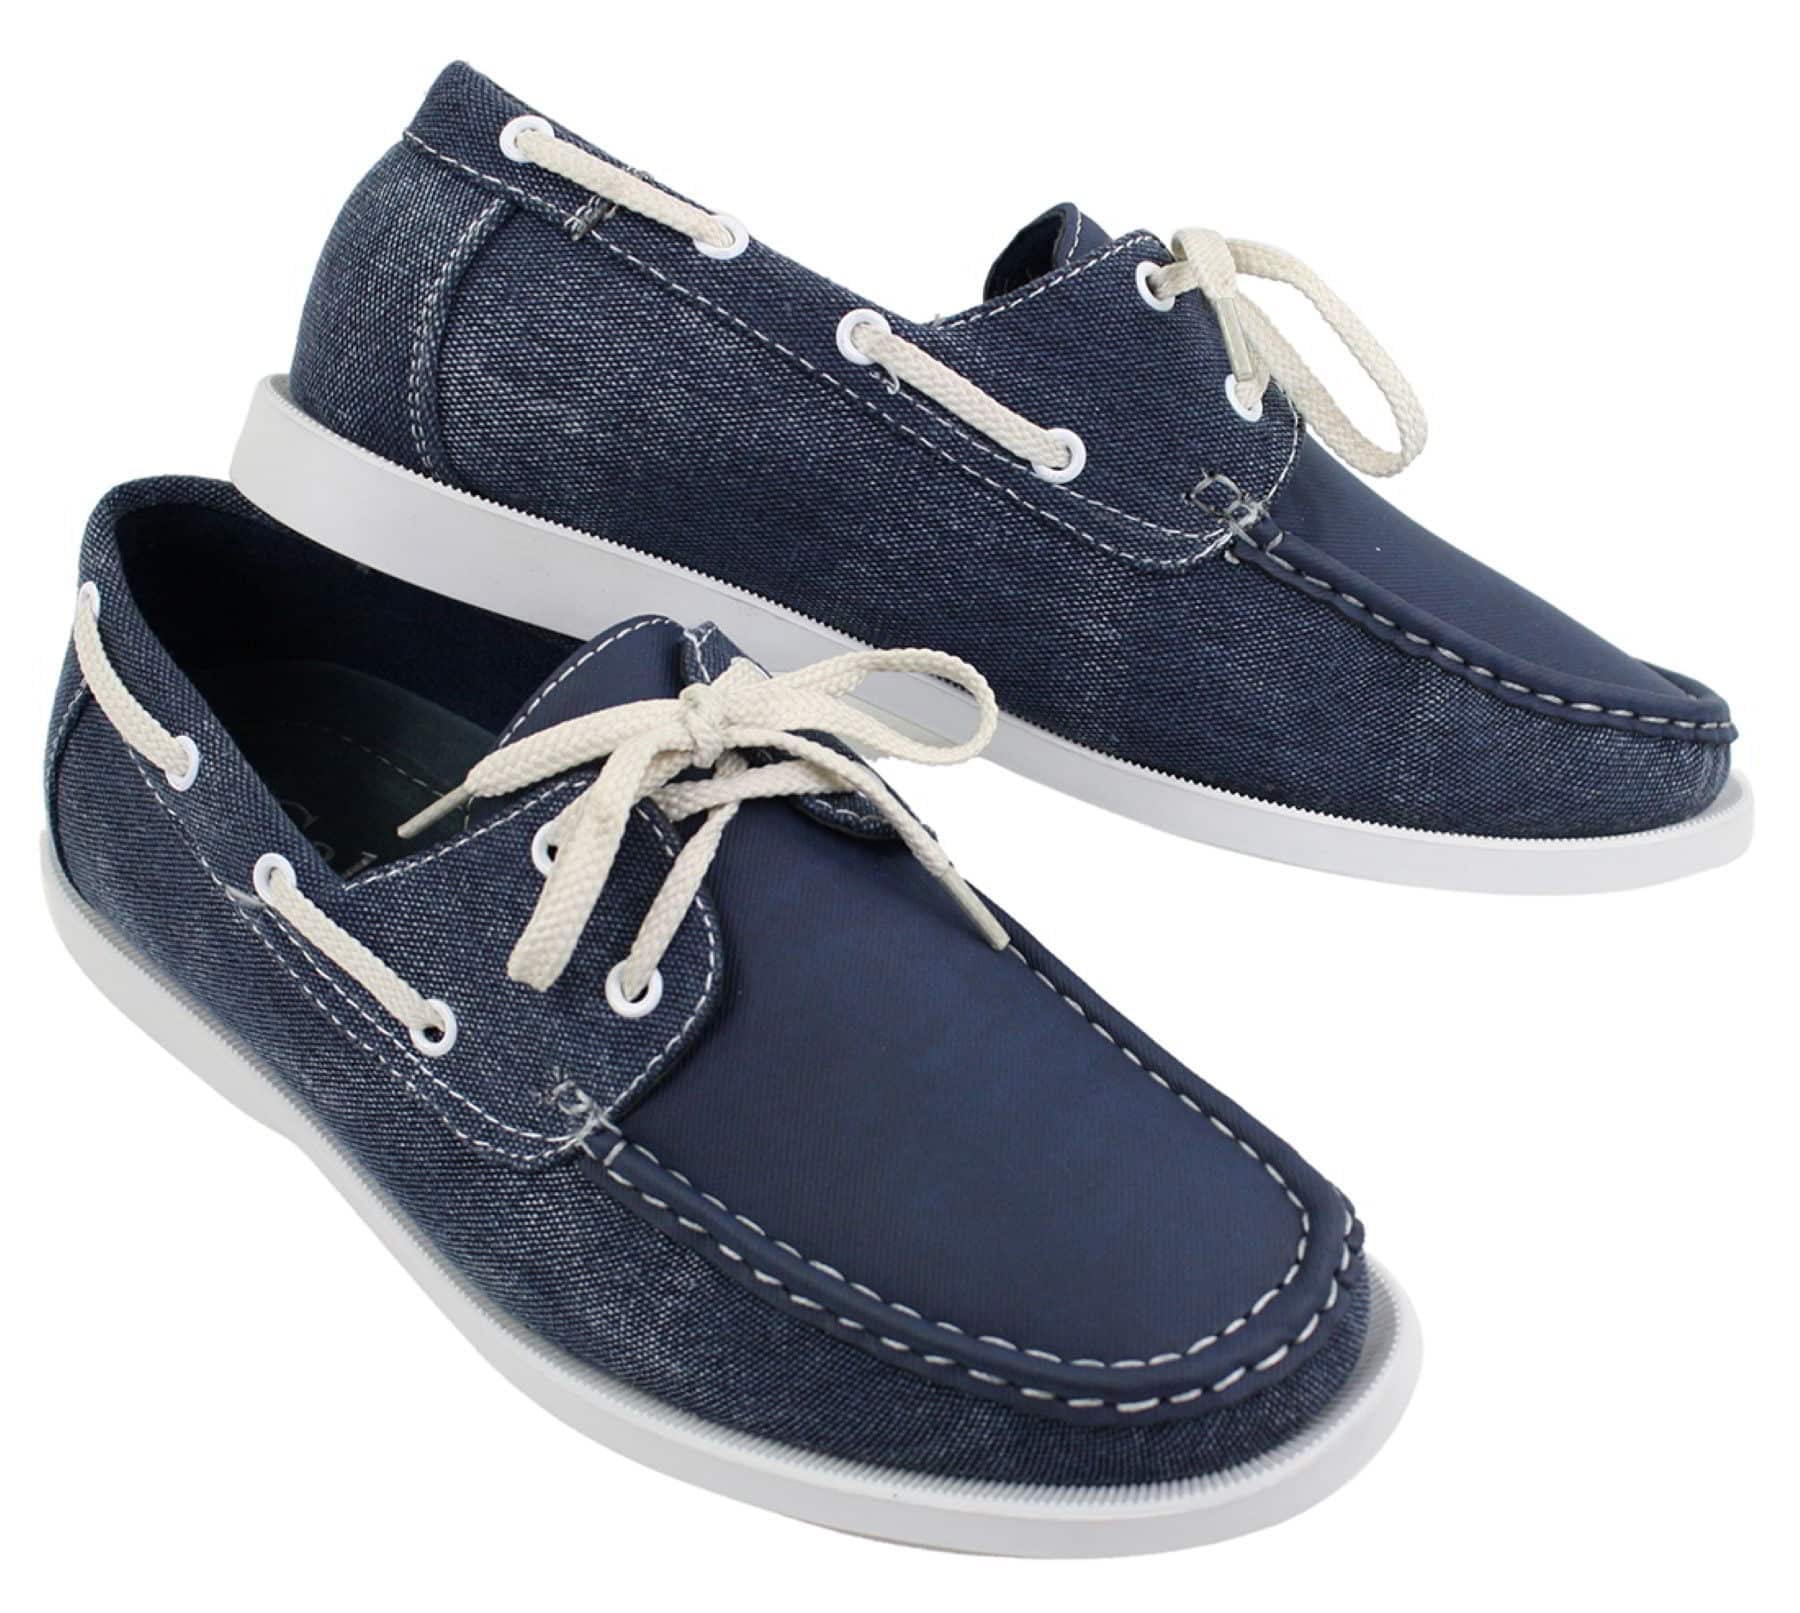 Mens Retro Denim Style Vintage Deck Boat Shoes Smart Casual Laced Navy ...